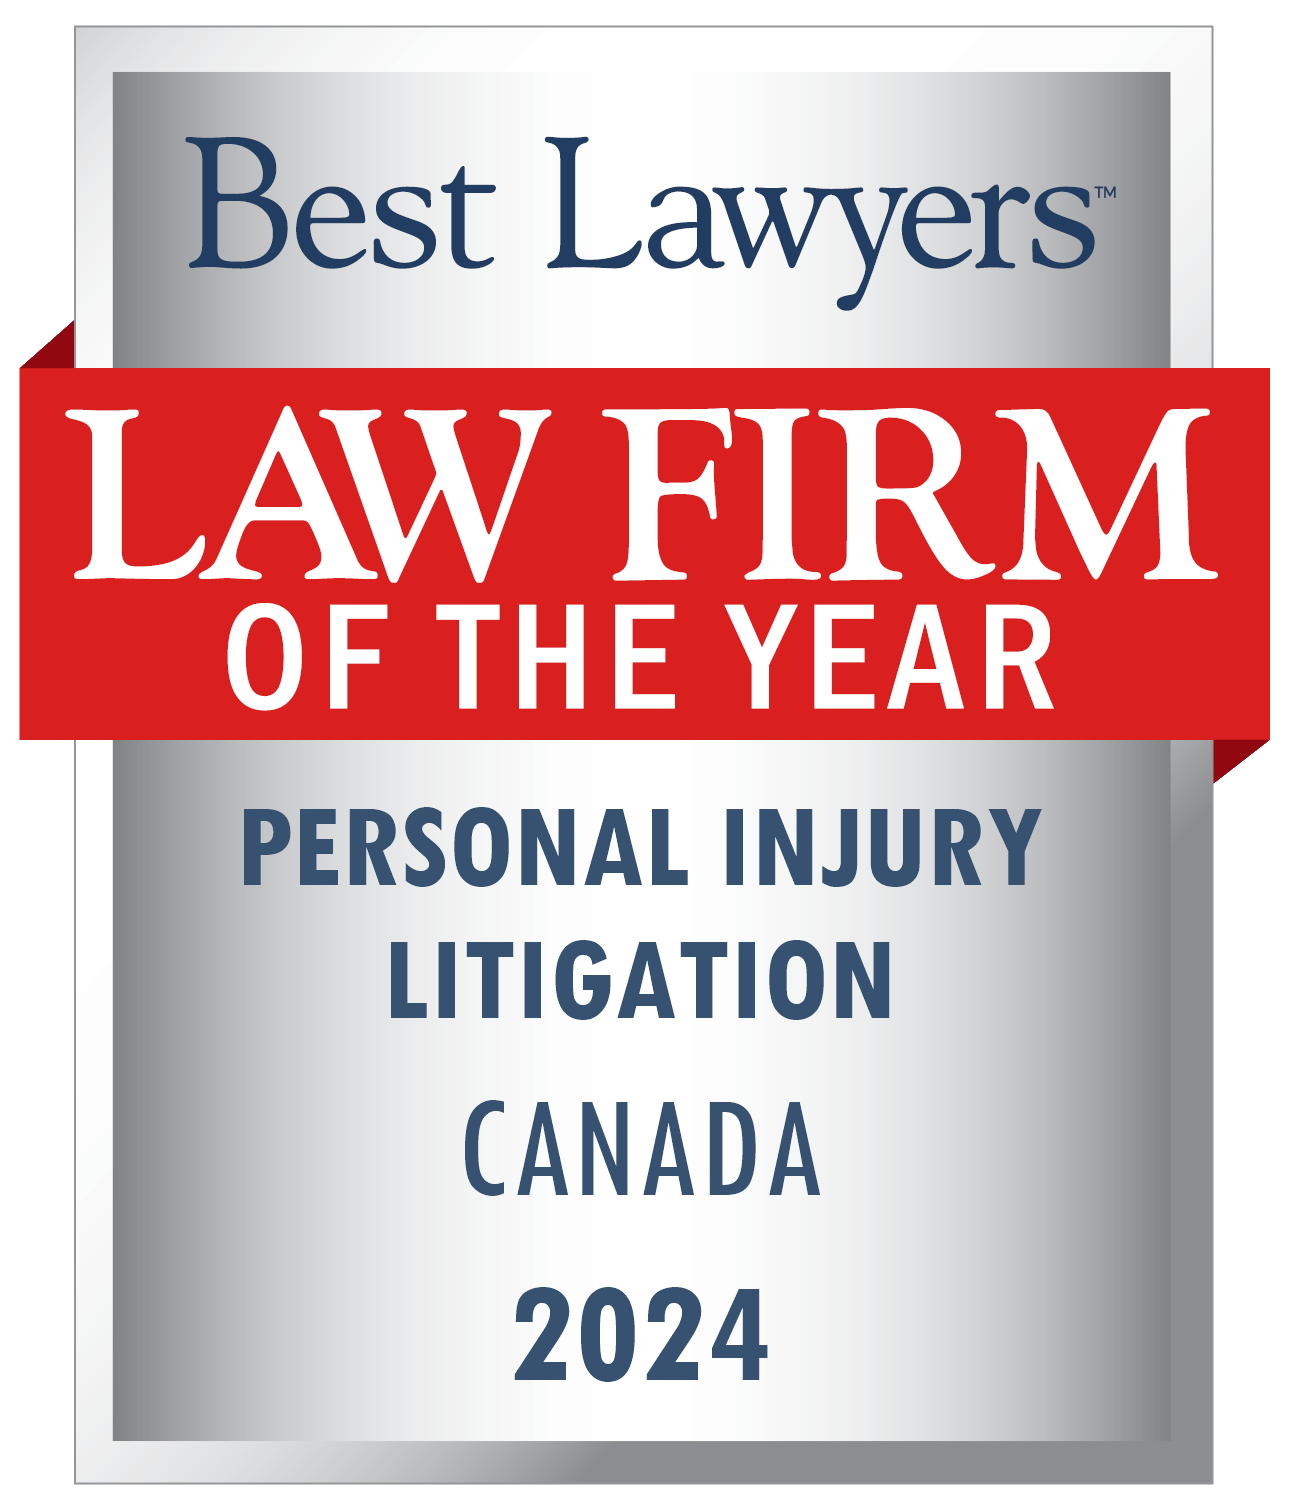 Law Firm of the Year 2024 Personal Injury Litigation - Best Lawyers